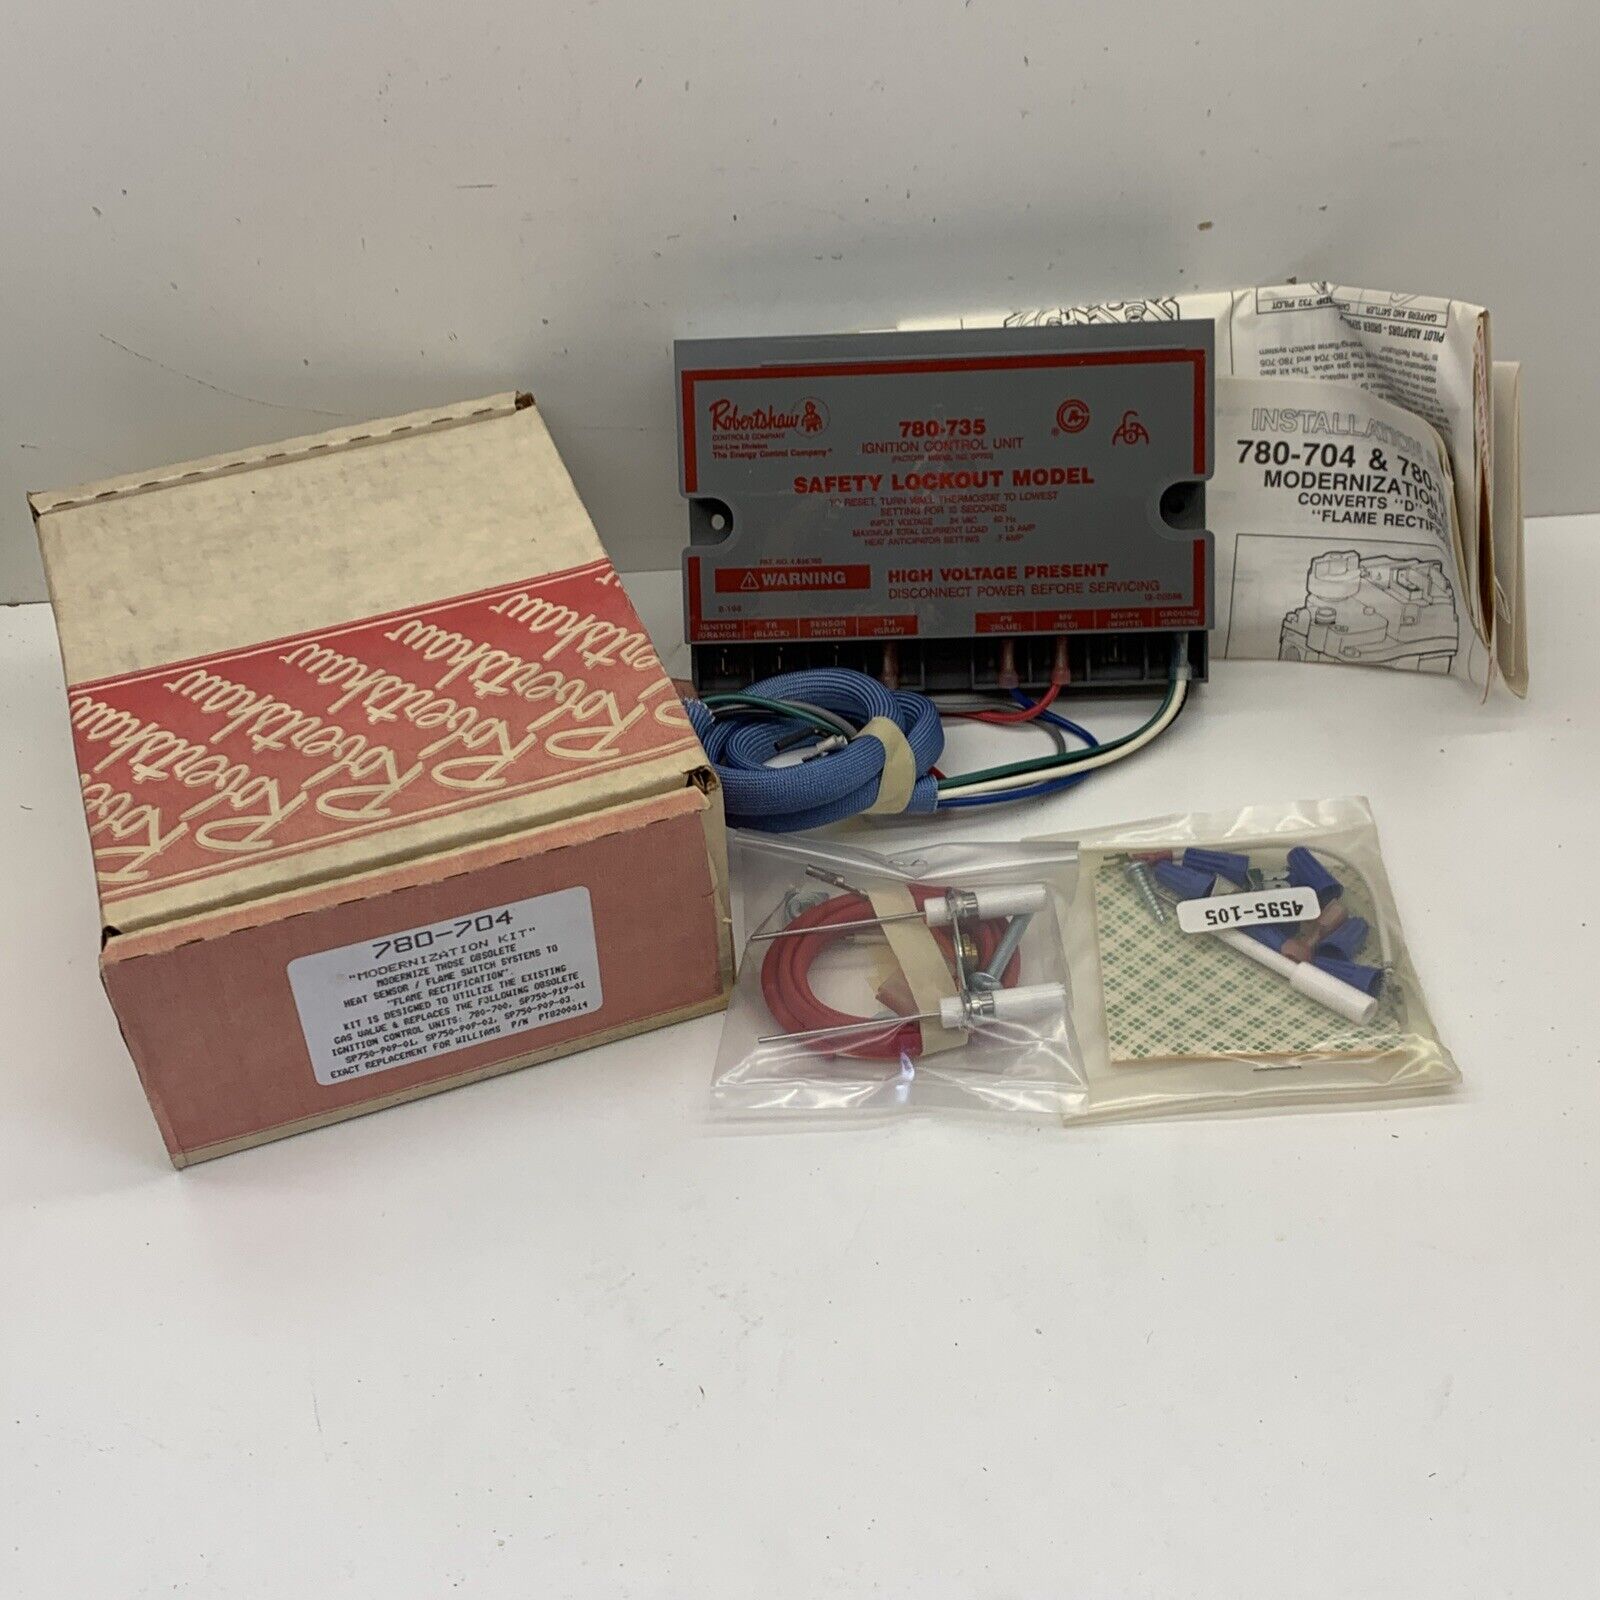 Robertshaw 780-704 Kit (780-735 Ignition Control Unit Safety Lockout Model)